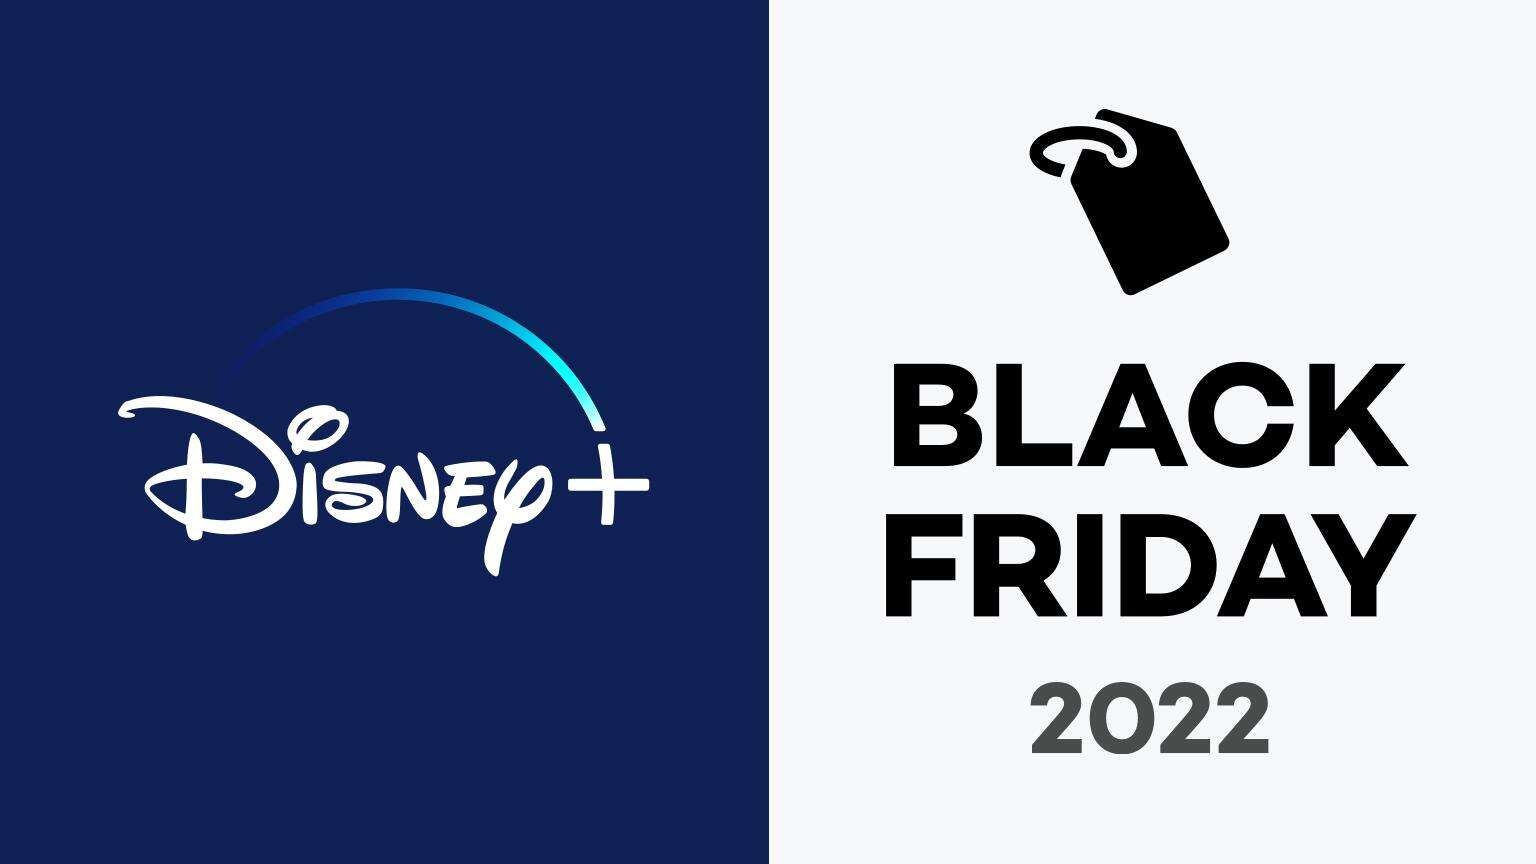 Disney+ Black Friday & Cyber Monday 2022 Deals and Sales - What